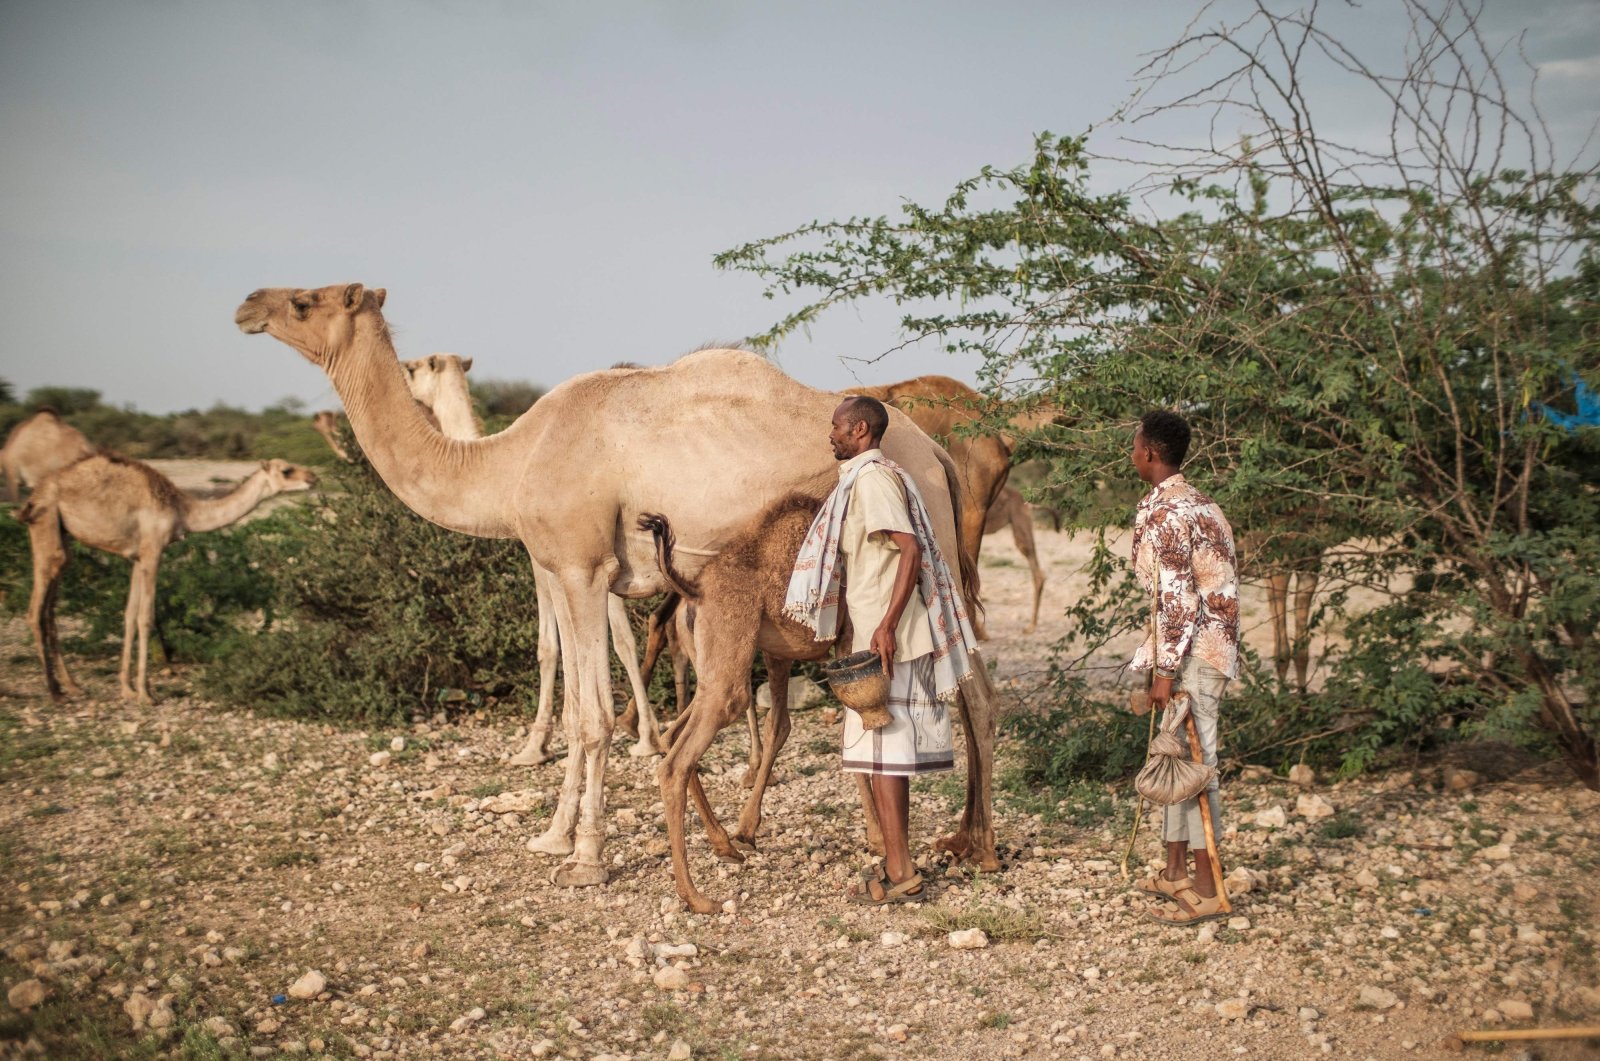 Ali Abdi Elmi (C) stands next to some of his camels in the outskirts of the city of Hargeisa, Somaliland, Somalia, Sept. 18, 2021. (AFP Photo)